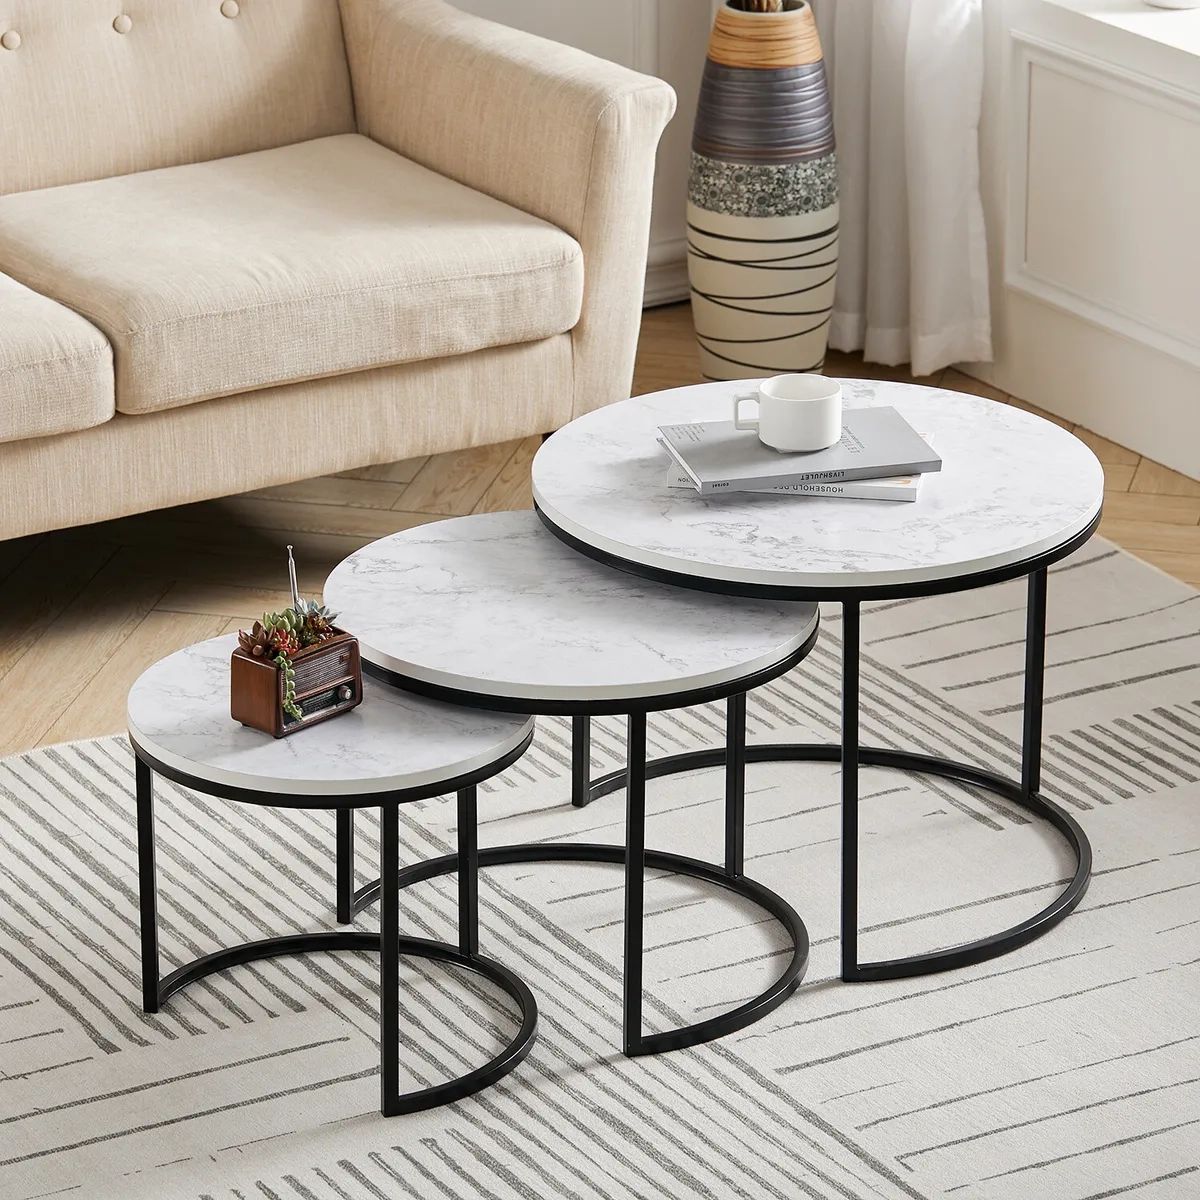 Nesting Round Coffee Table Set Of 2/3 Nested End Tables Stacking Sofa Side  Desk | Ebay With Regard To Coffee Tables Of 3 Nesting Tables (View 14 of 15)